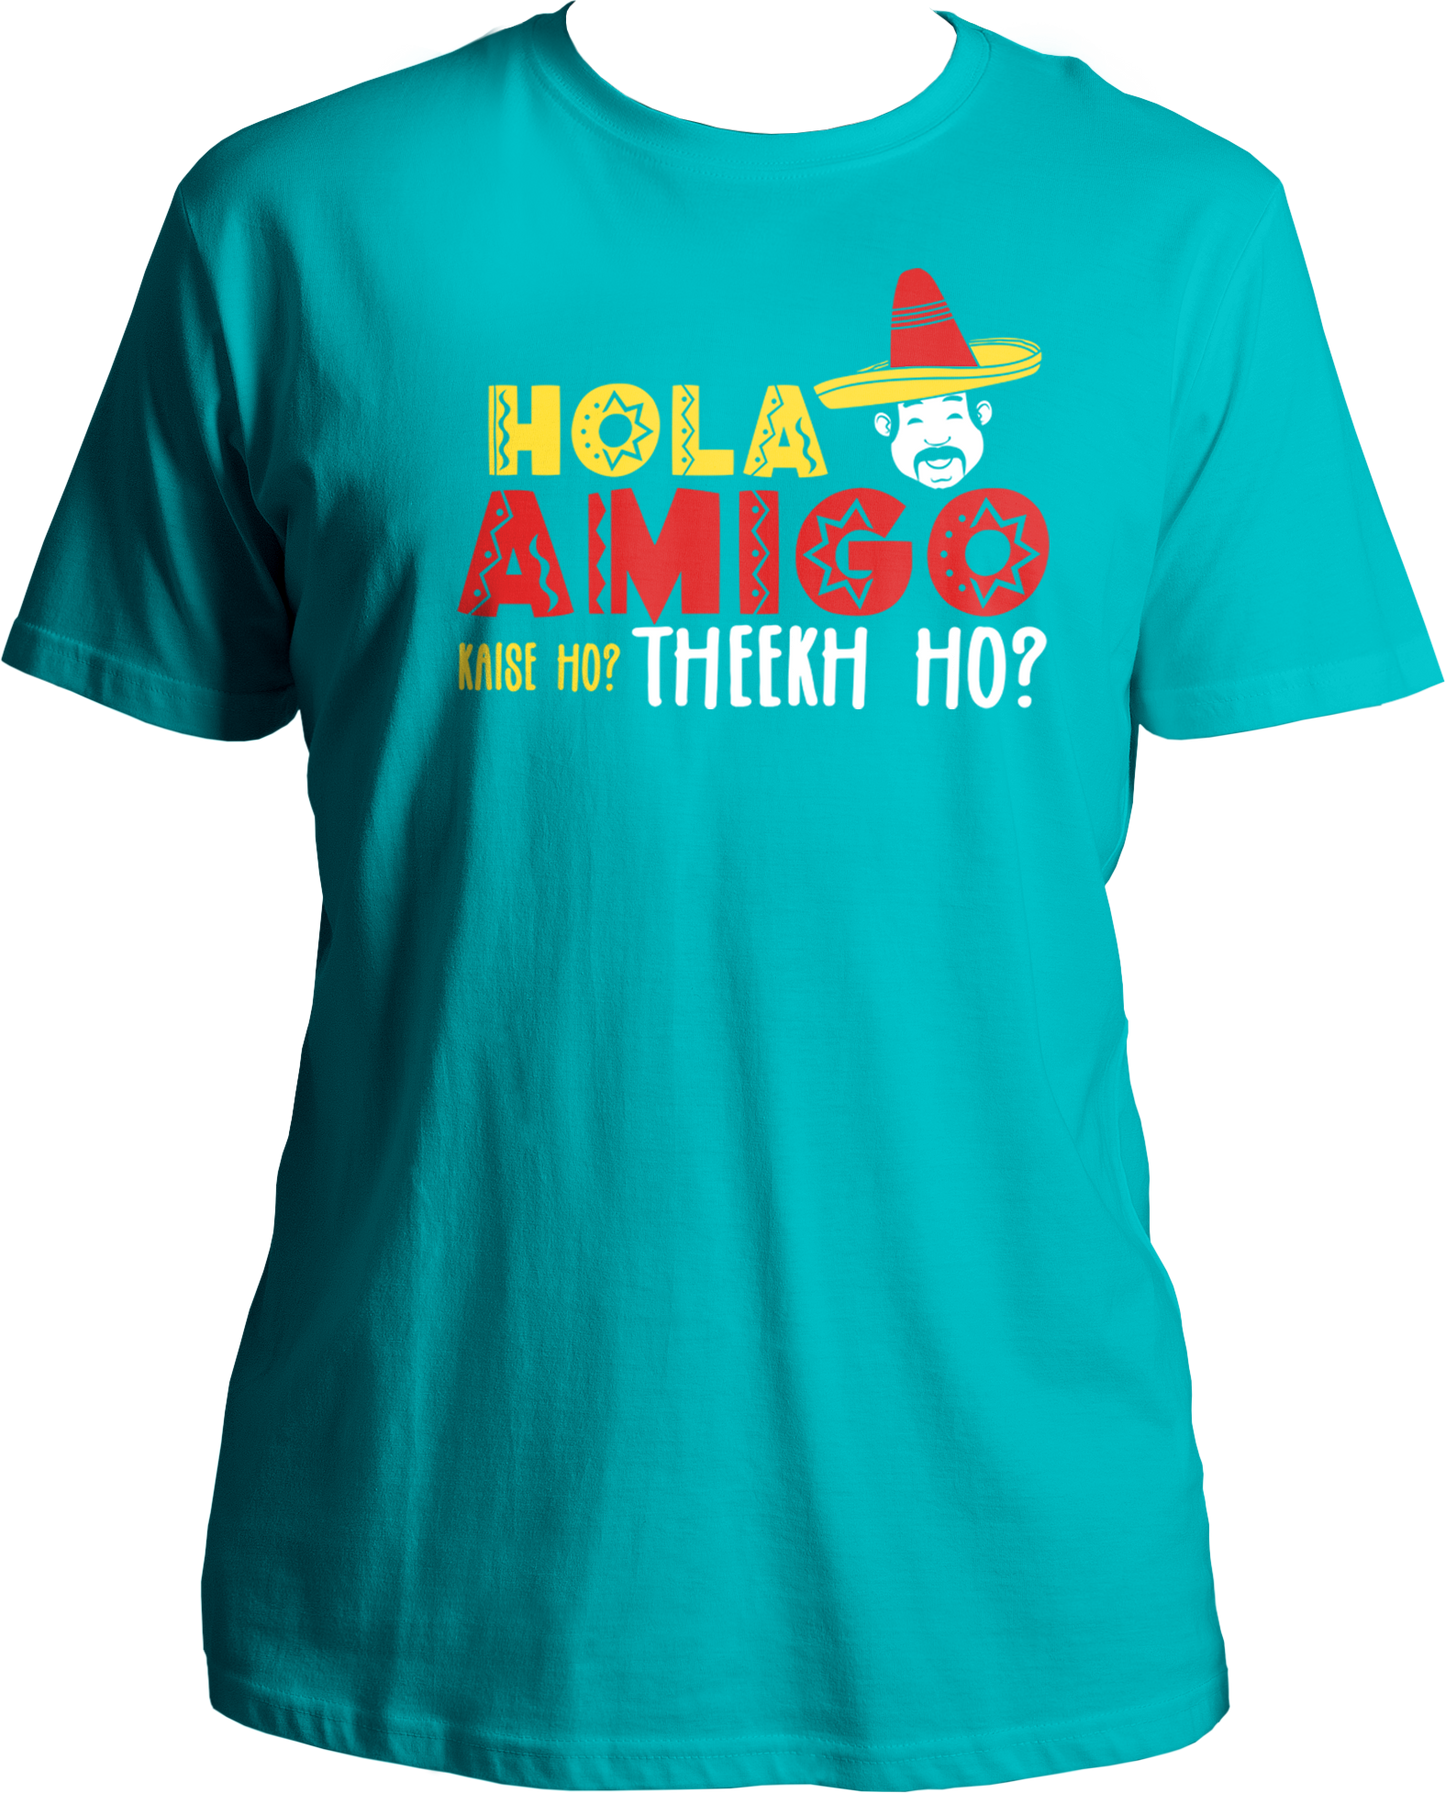 Indulge in the rhythm of Indian rap sensation Krsna's hit track with our exclusive Hola Amigo Kaise Ho? Theekh Ho? Unisex T-Shirts. Crafted from 100% pure cotton, these tees are the perfect blend of comfort and style.